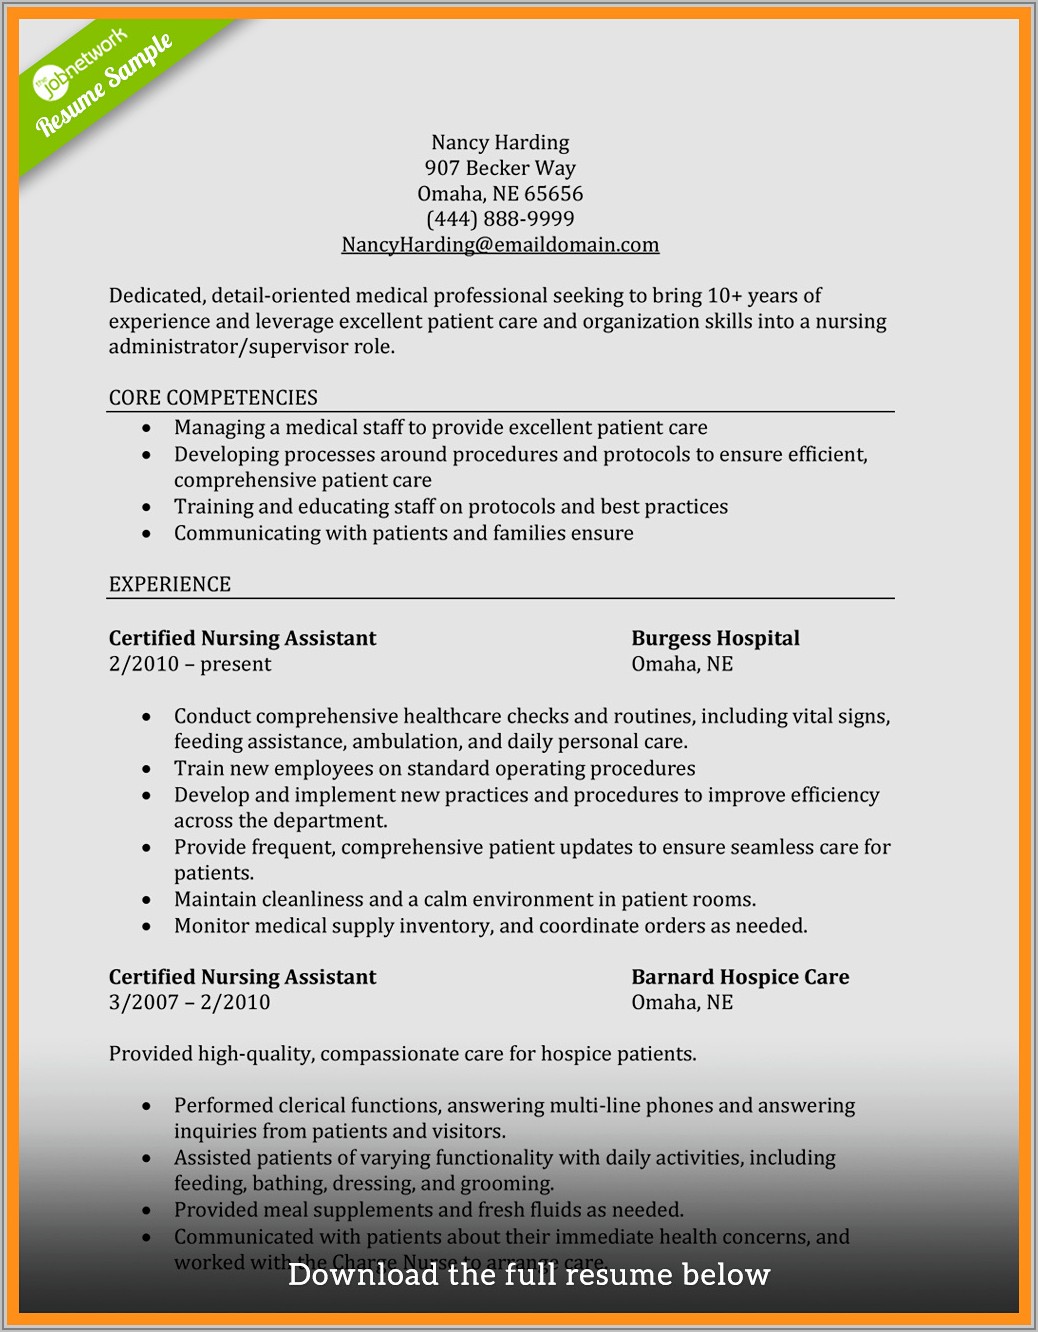 Resumes For Certified Nursing Assistant